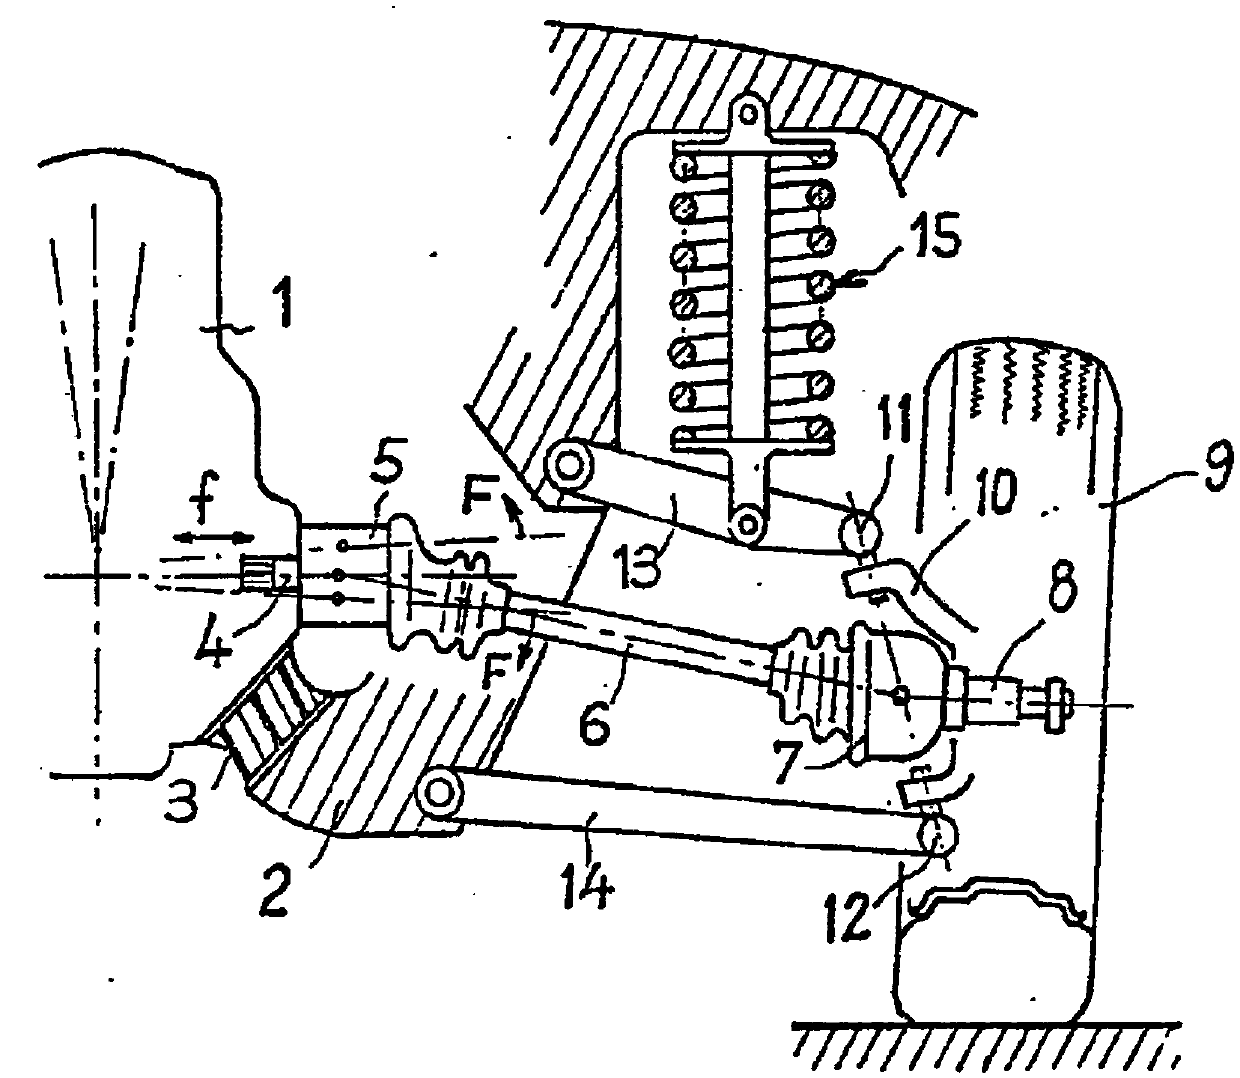 Lateral drive shaft of drive train of motor vehicle comprising internal combustion engine and transducer